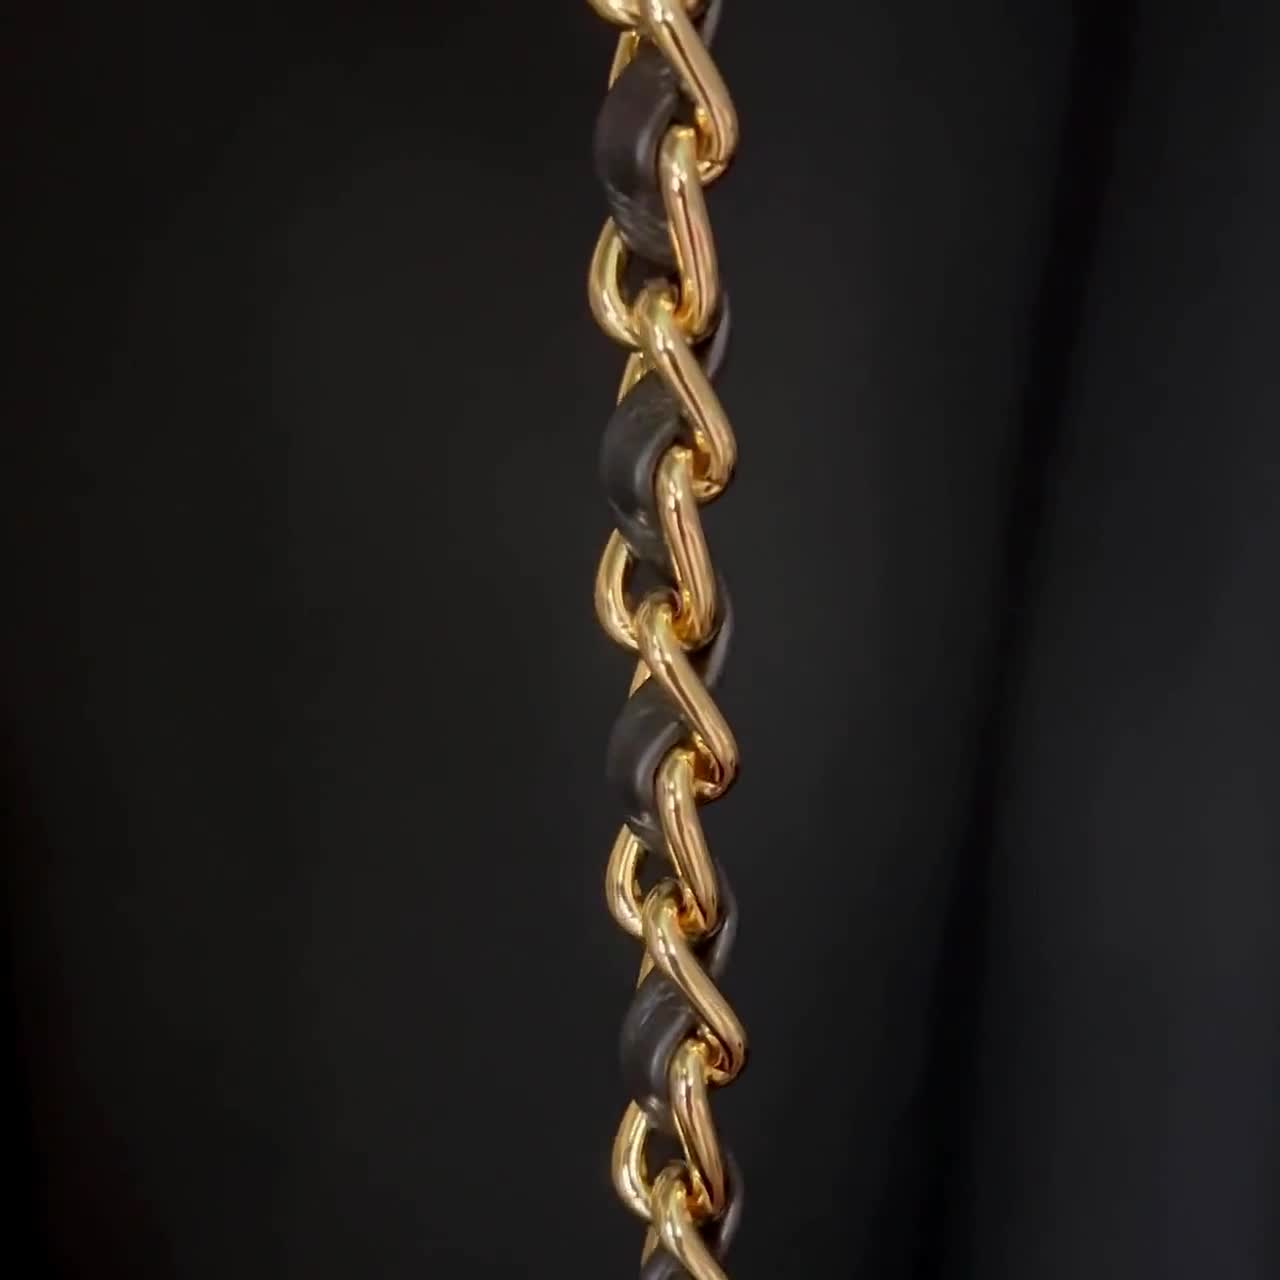 Classic GOLD Chain Bag Strap With Leather Weaved/threaded Through Choice of  Length & Hook/clasp Style Made by Hand -  Norway